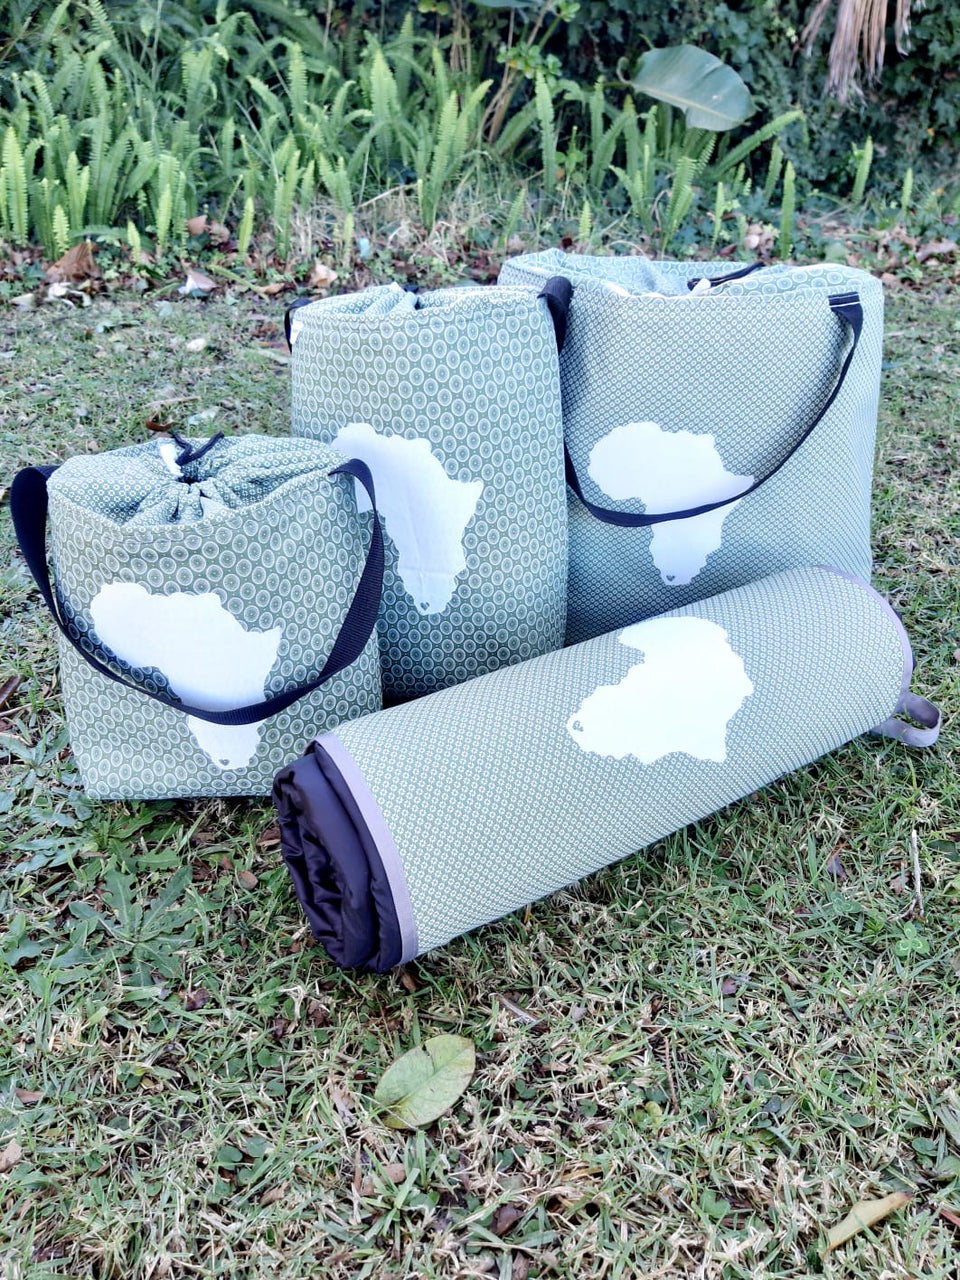 Insulated Wine Bags